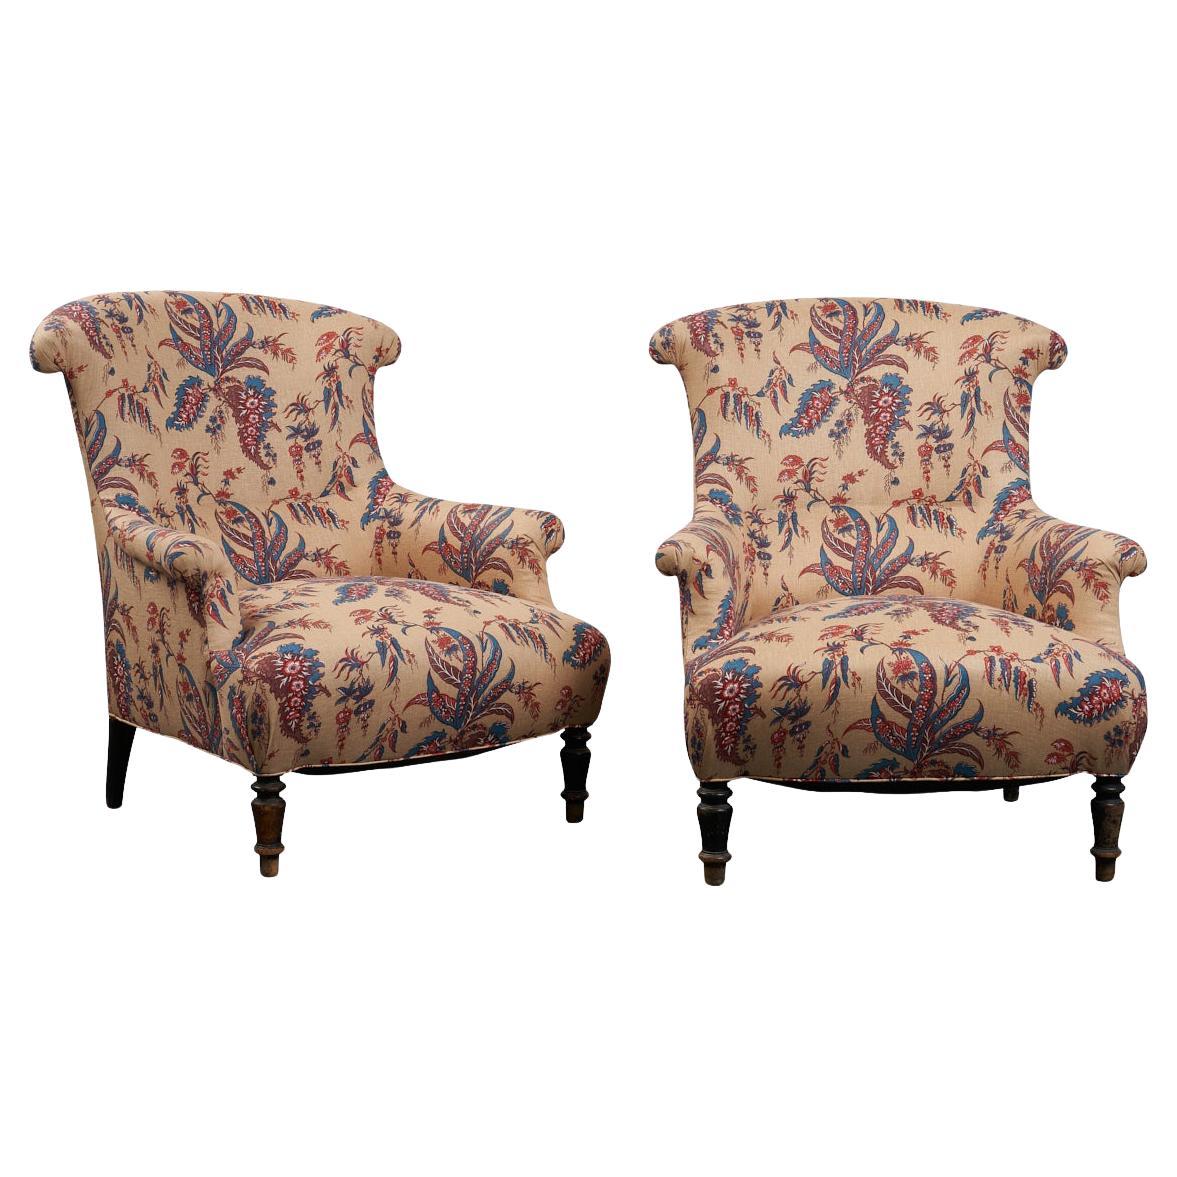 Pair of Chairs, Late 19th Century, France, Reupholstered in Schumacher Fabric